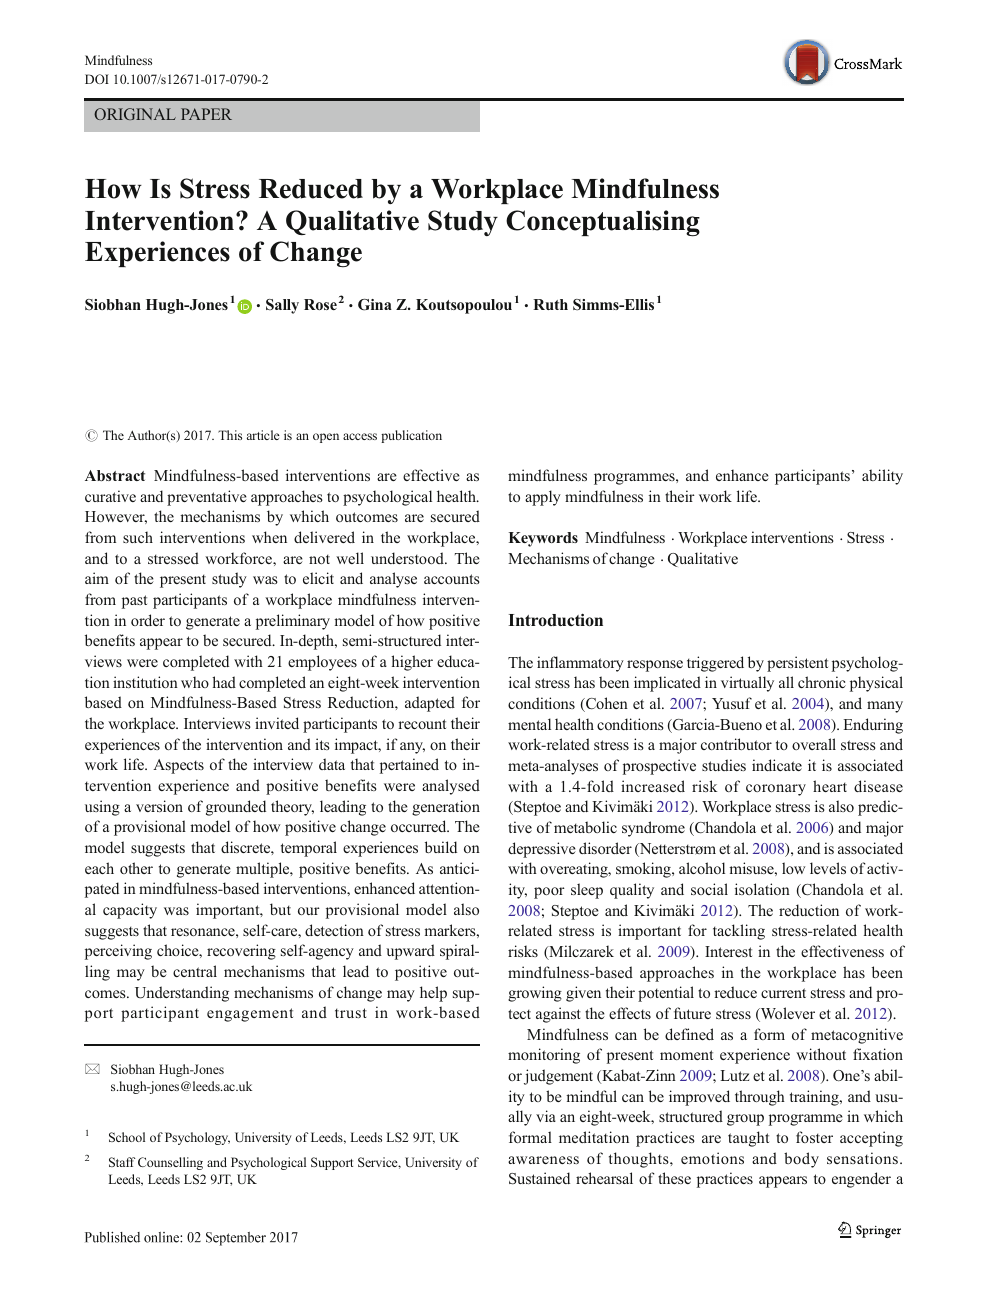 How Is Stress Reduced By A Workplace Mindfulness Intervention A Qualitative Study Conceptualising Experiences Of Change Topic Of Research Paper In Psychology Download Scholarly Article Pdf And Read For Free On